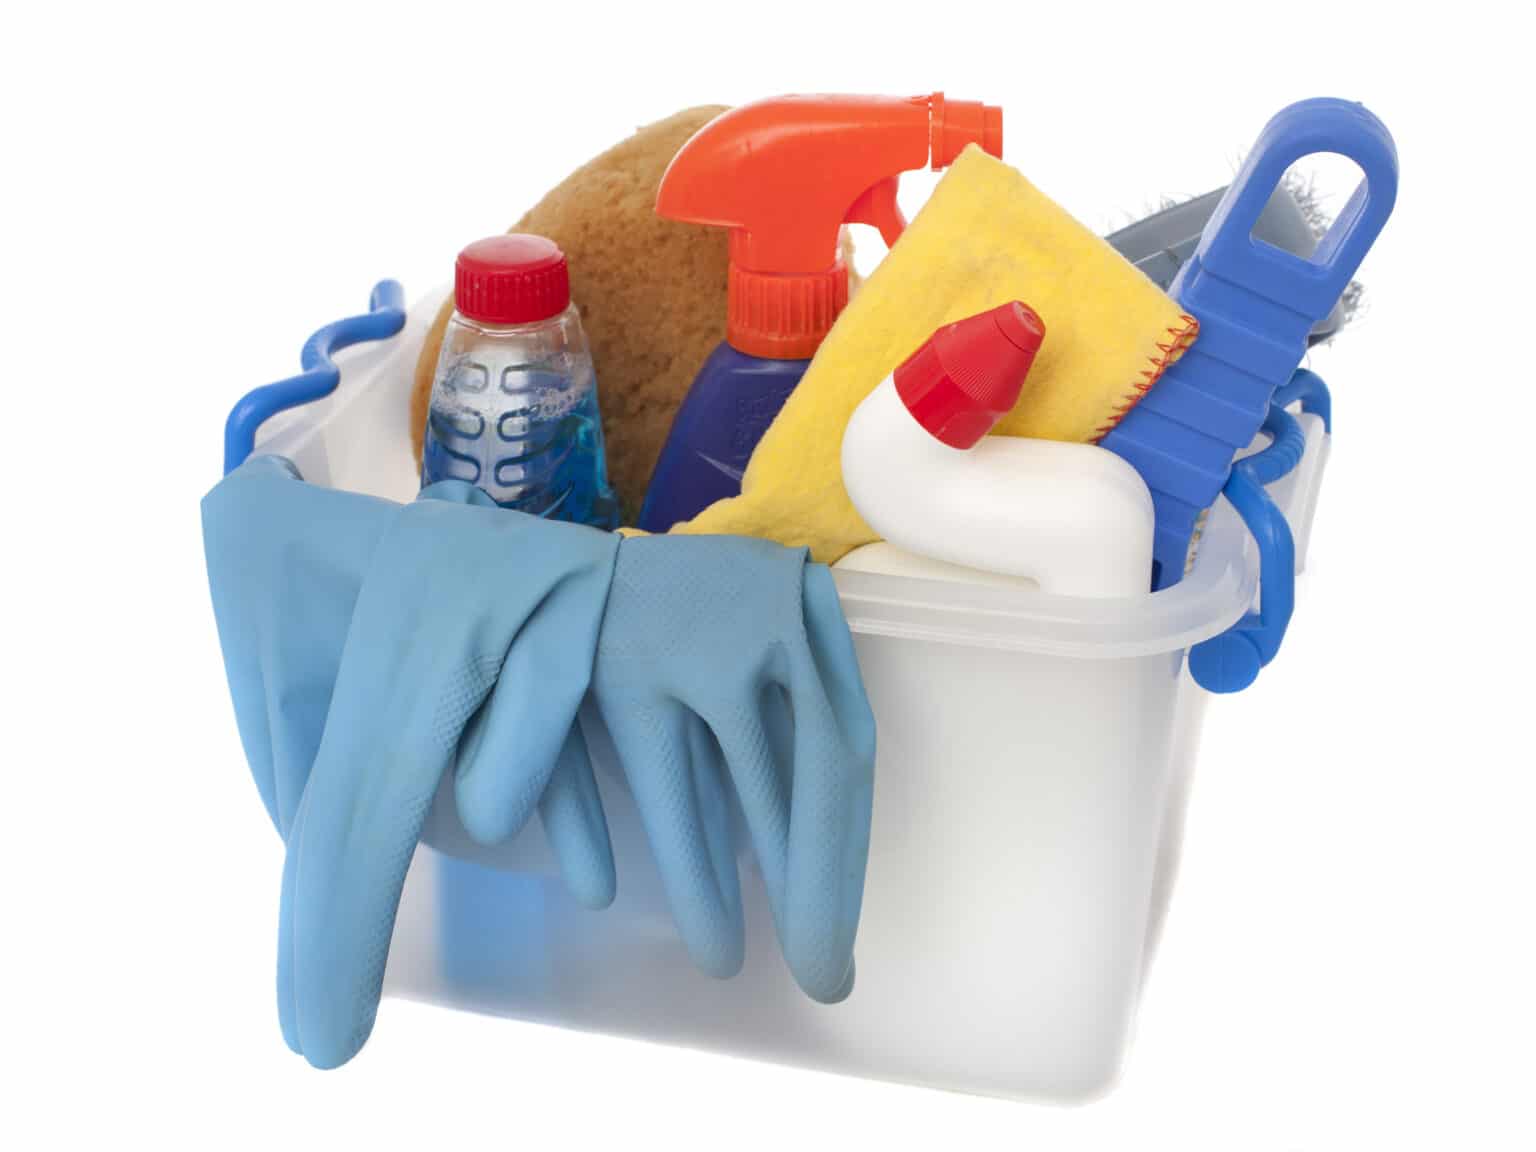 Gloves, sponge and cleaning products in the bucket.  Illustration of the text about professional hygiene.